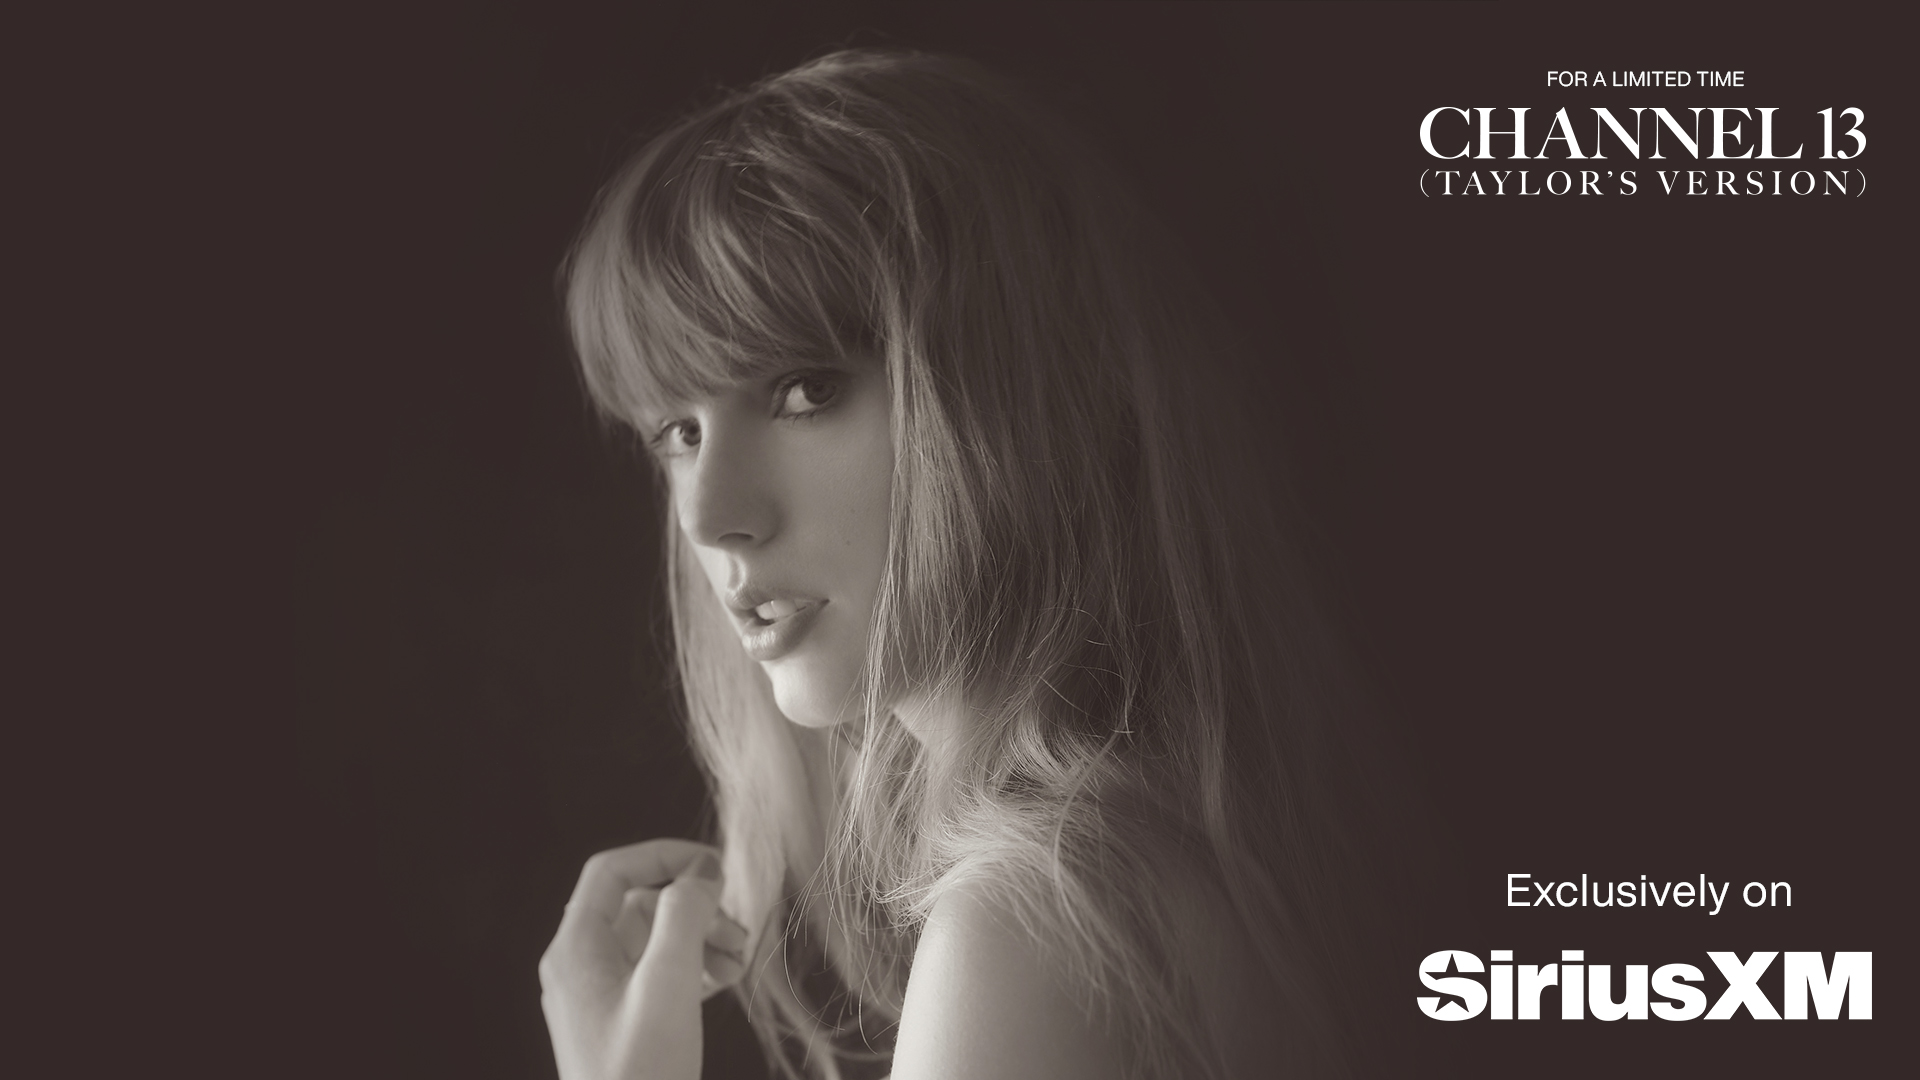  For a Limited Time Channel 13 (Taylor's Version) Exclusively on SiriusXM